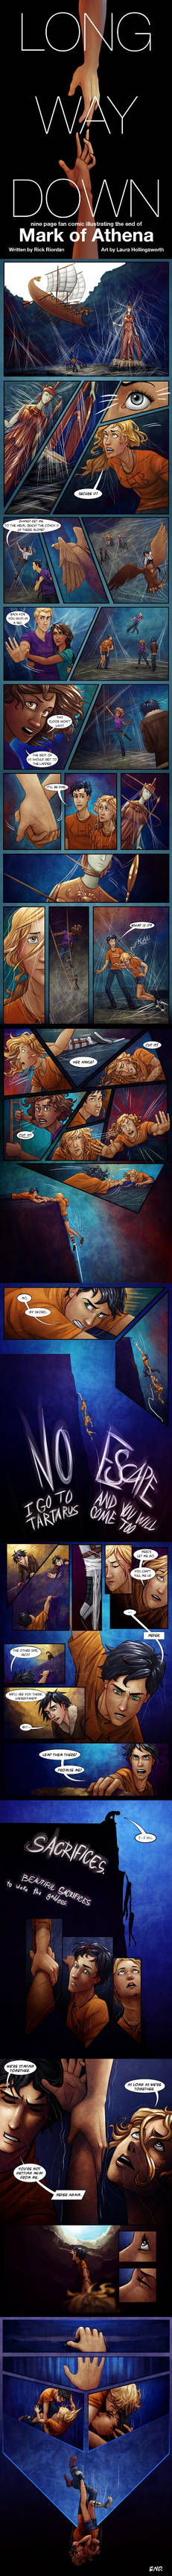 Long Way Down - Complete Comic - Mark of Athena